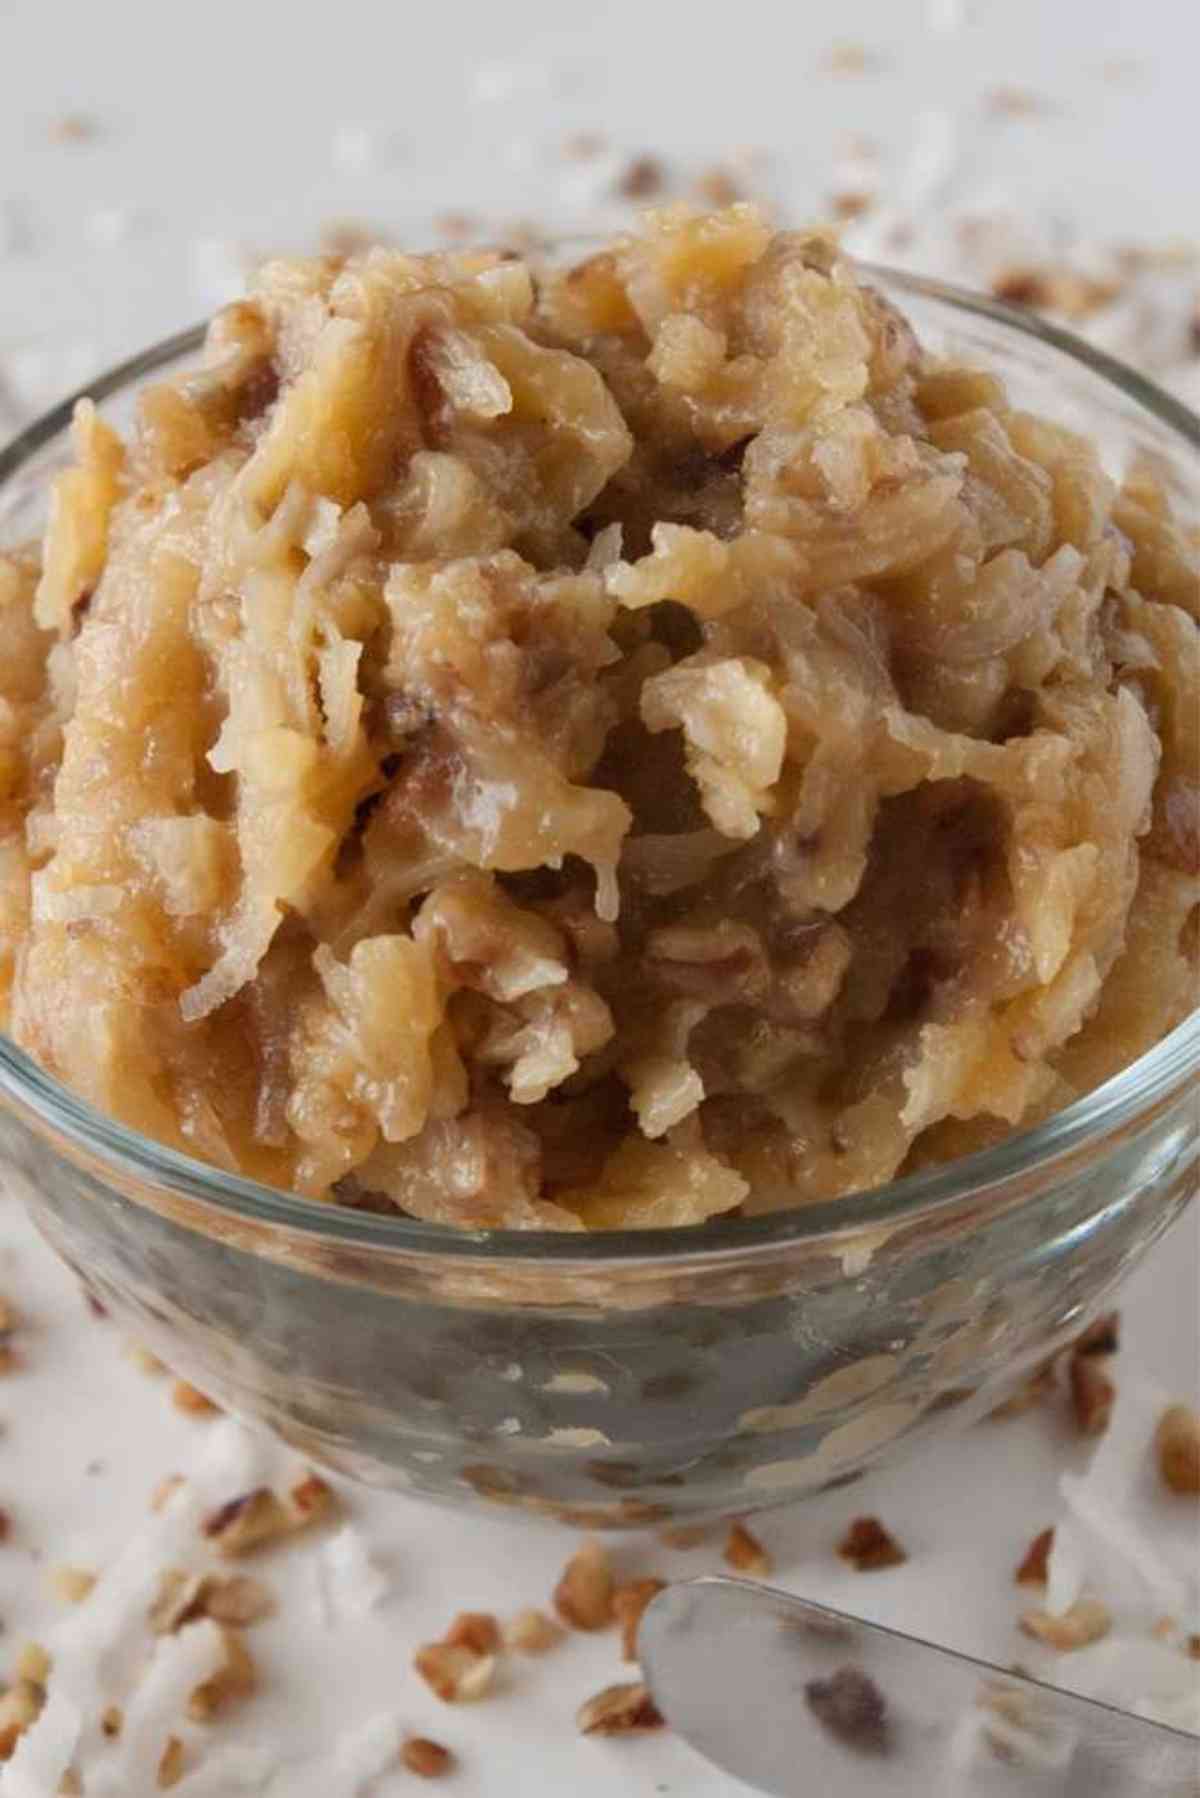 A little bowl of coconut pecan frosting.